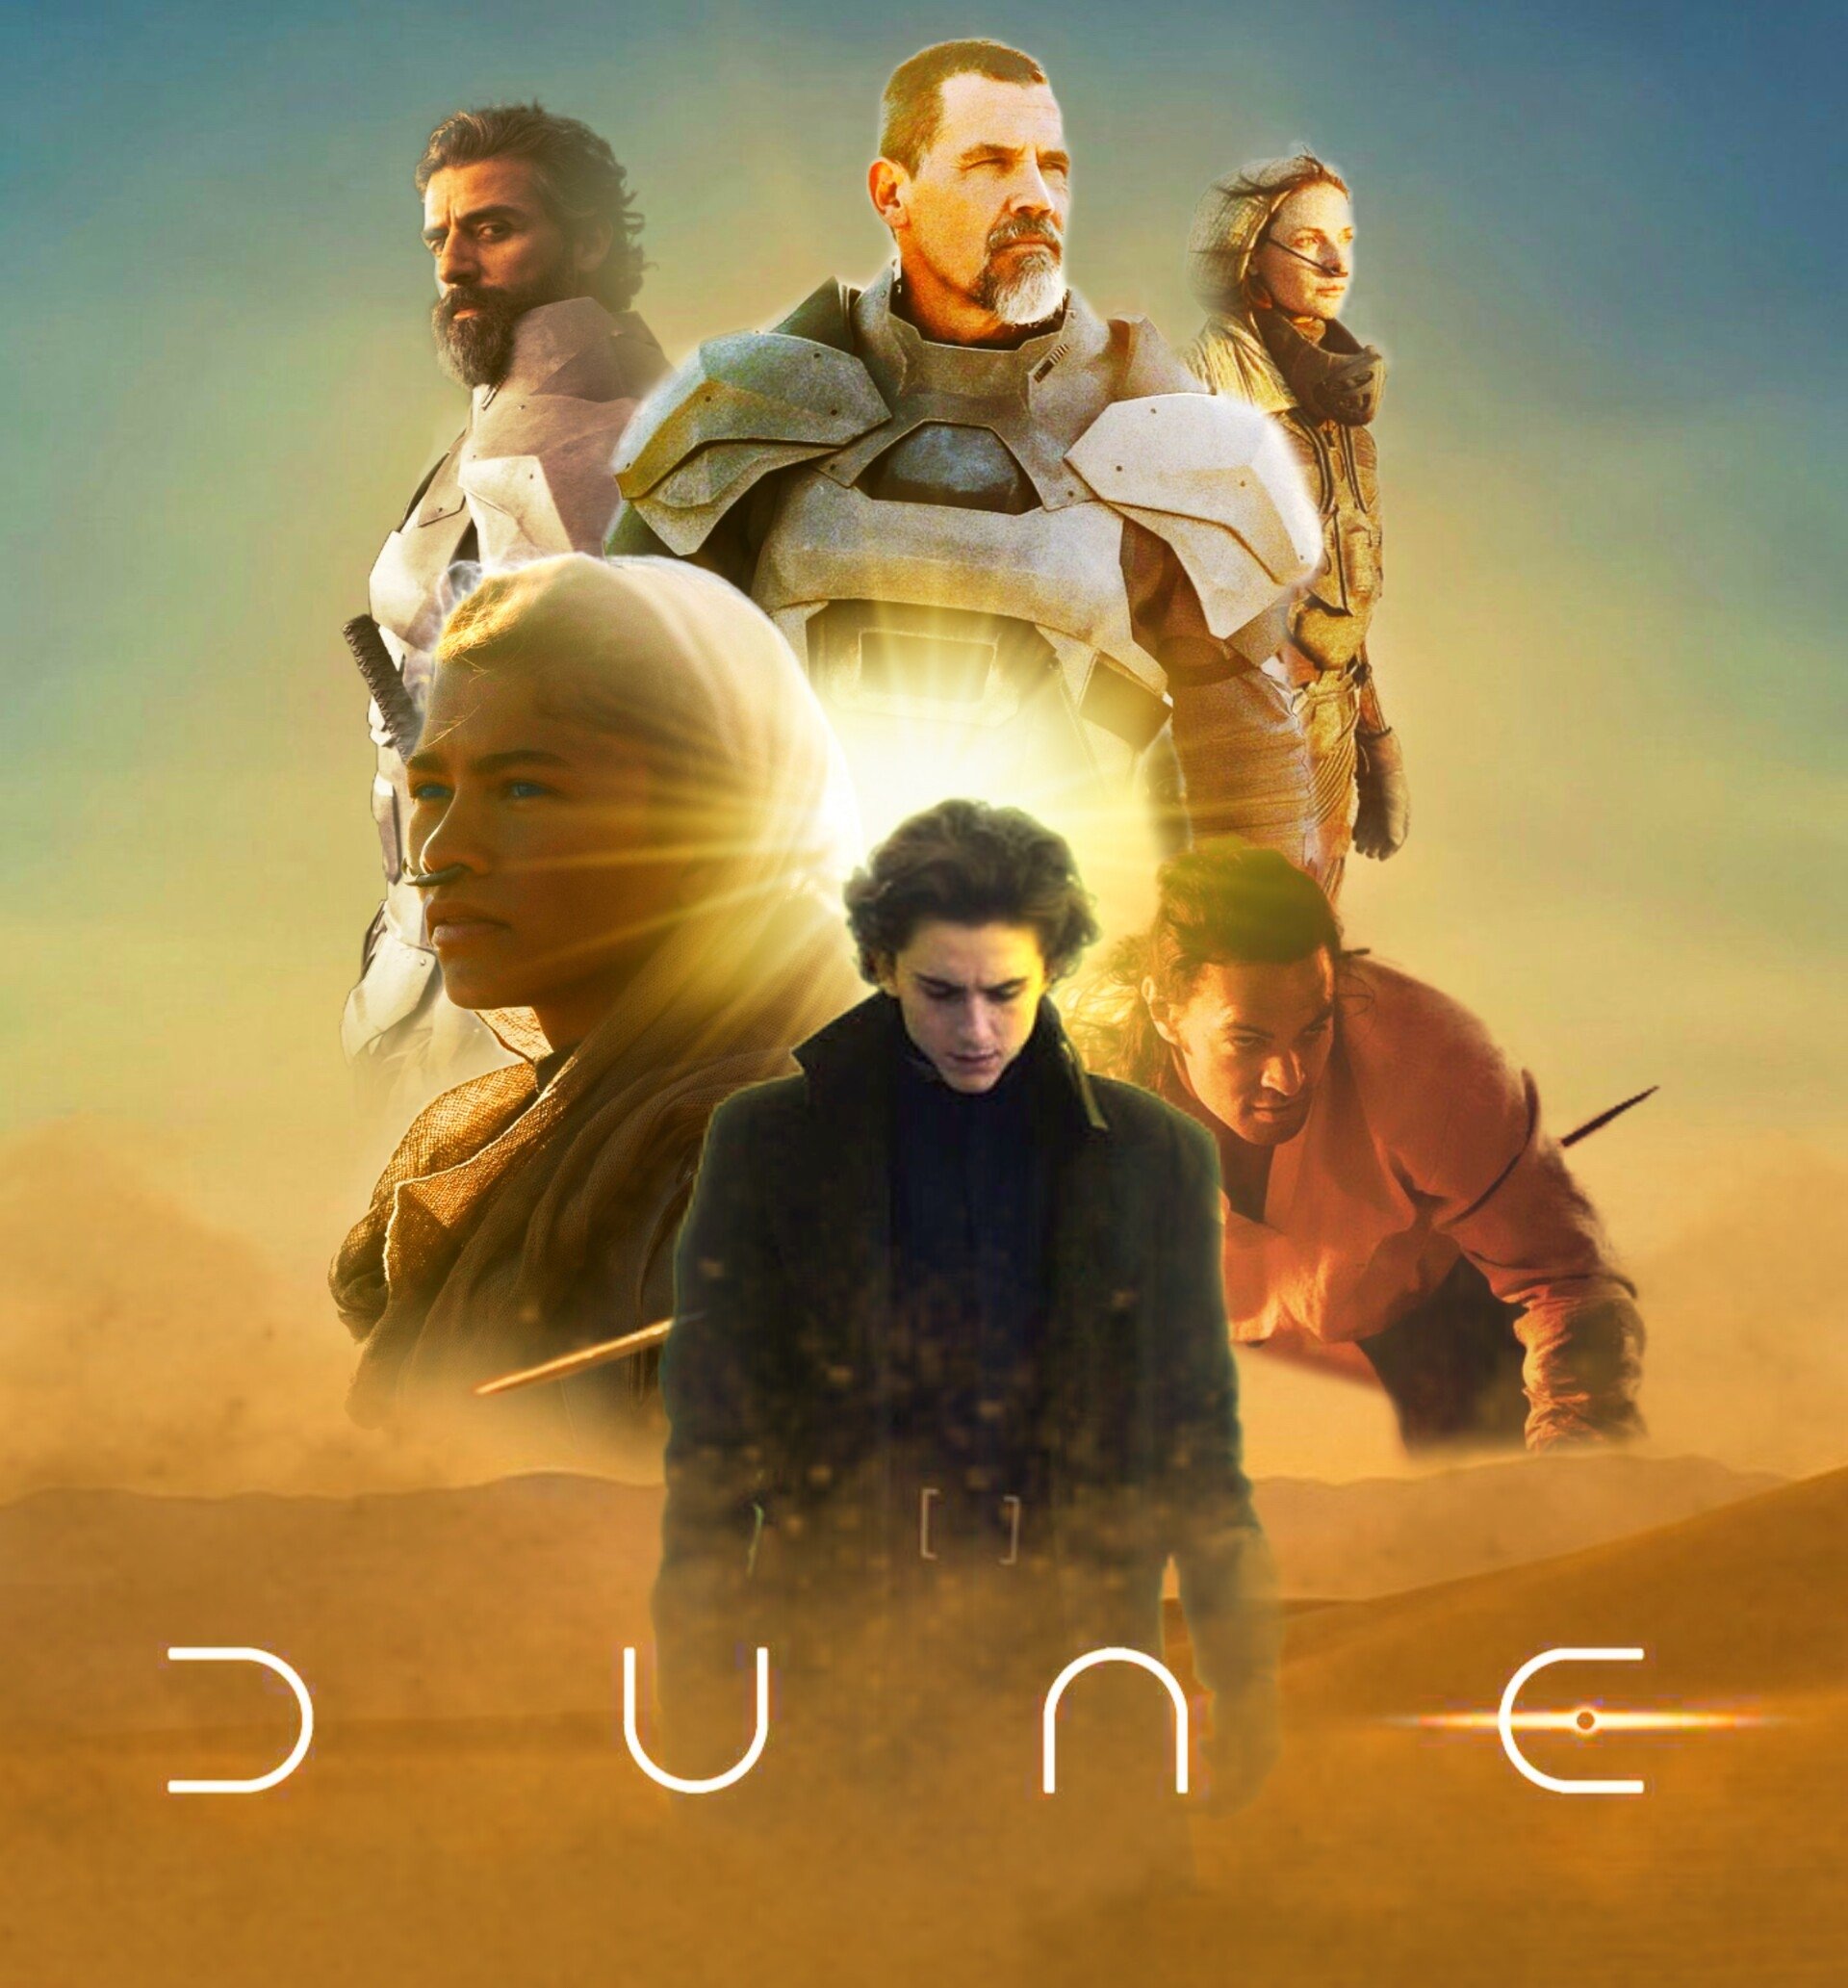 download dune mmo release date